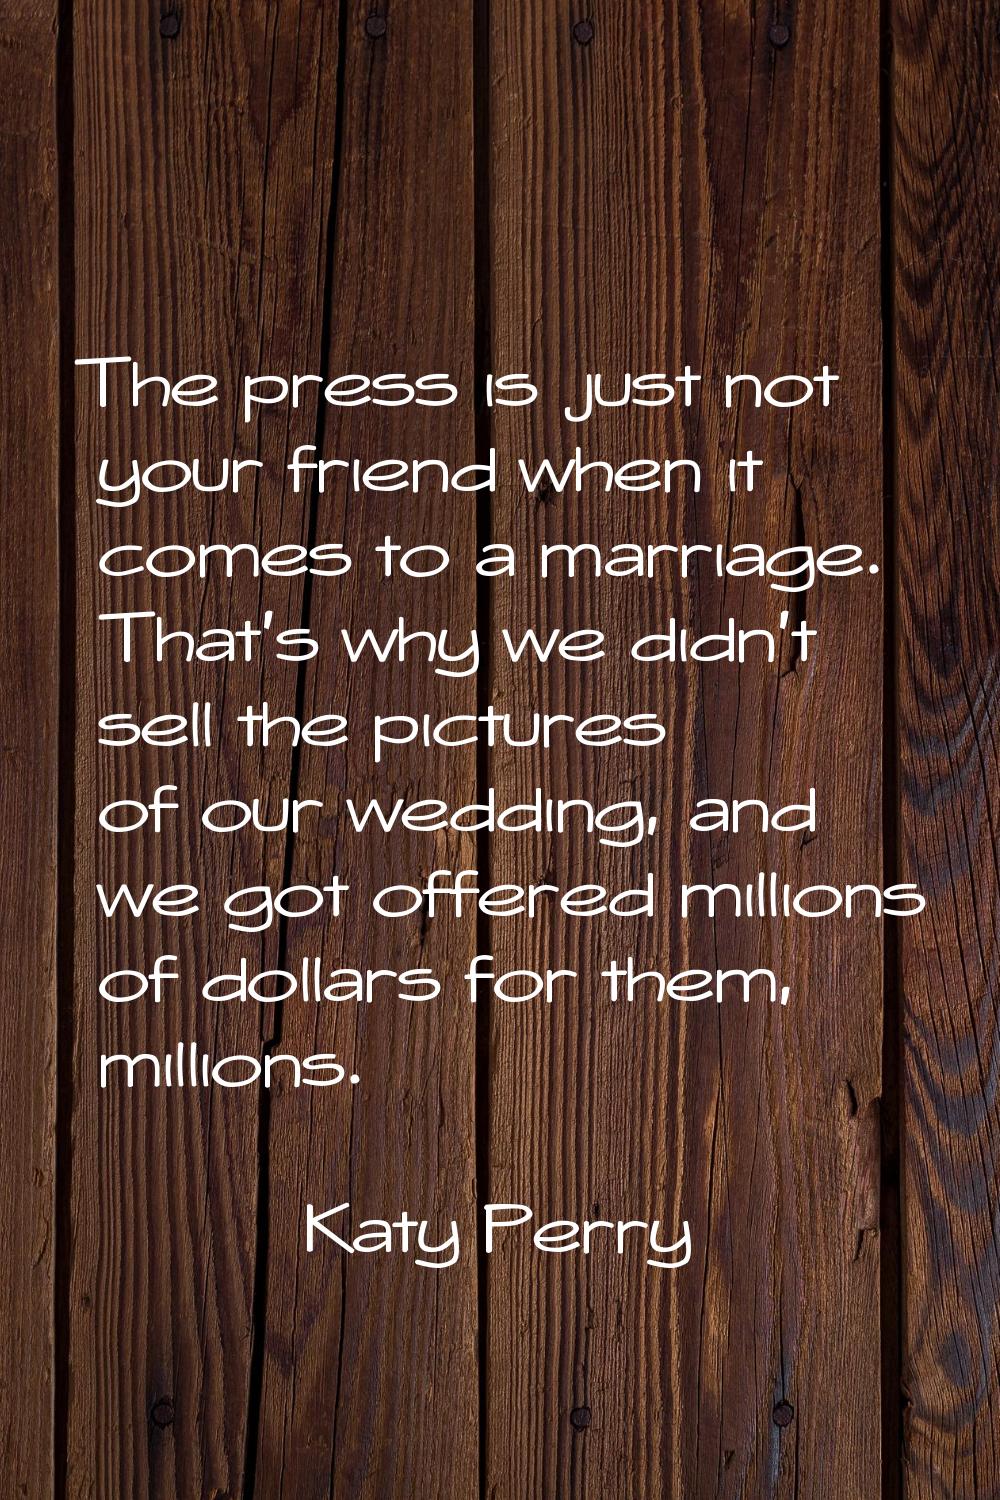 The press is just not your friend when it comes to a marriage. That's why we didn't sell the pictur